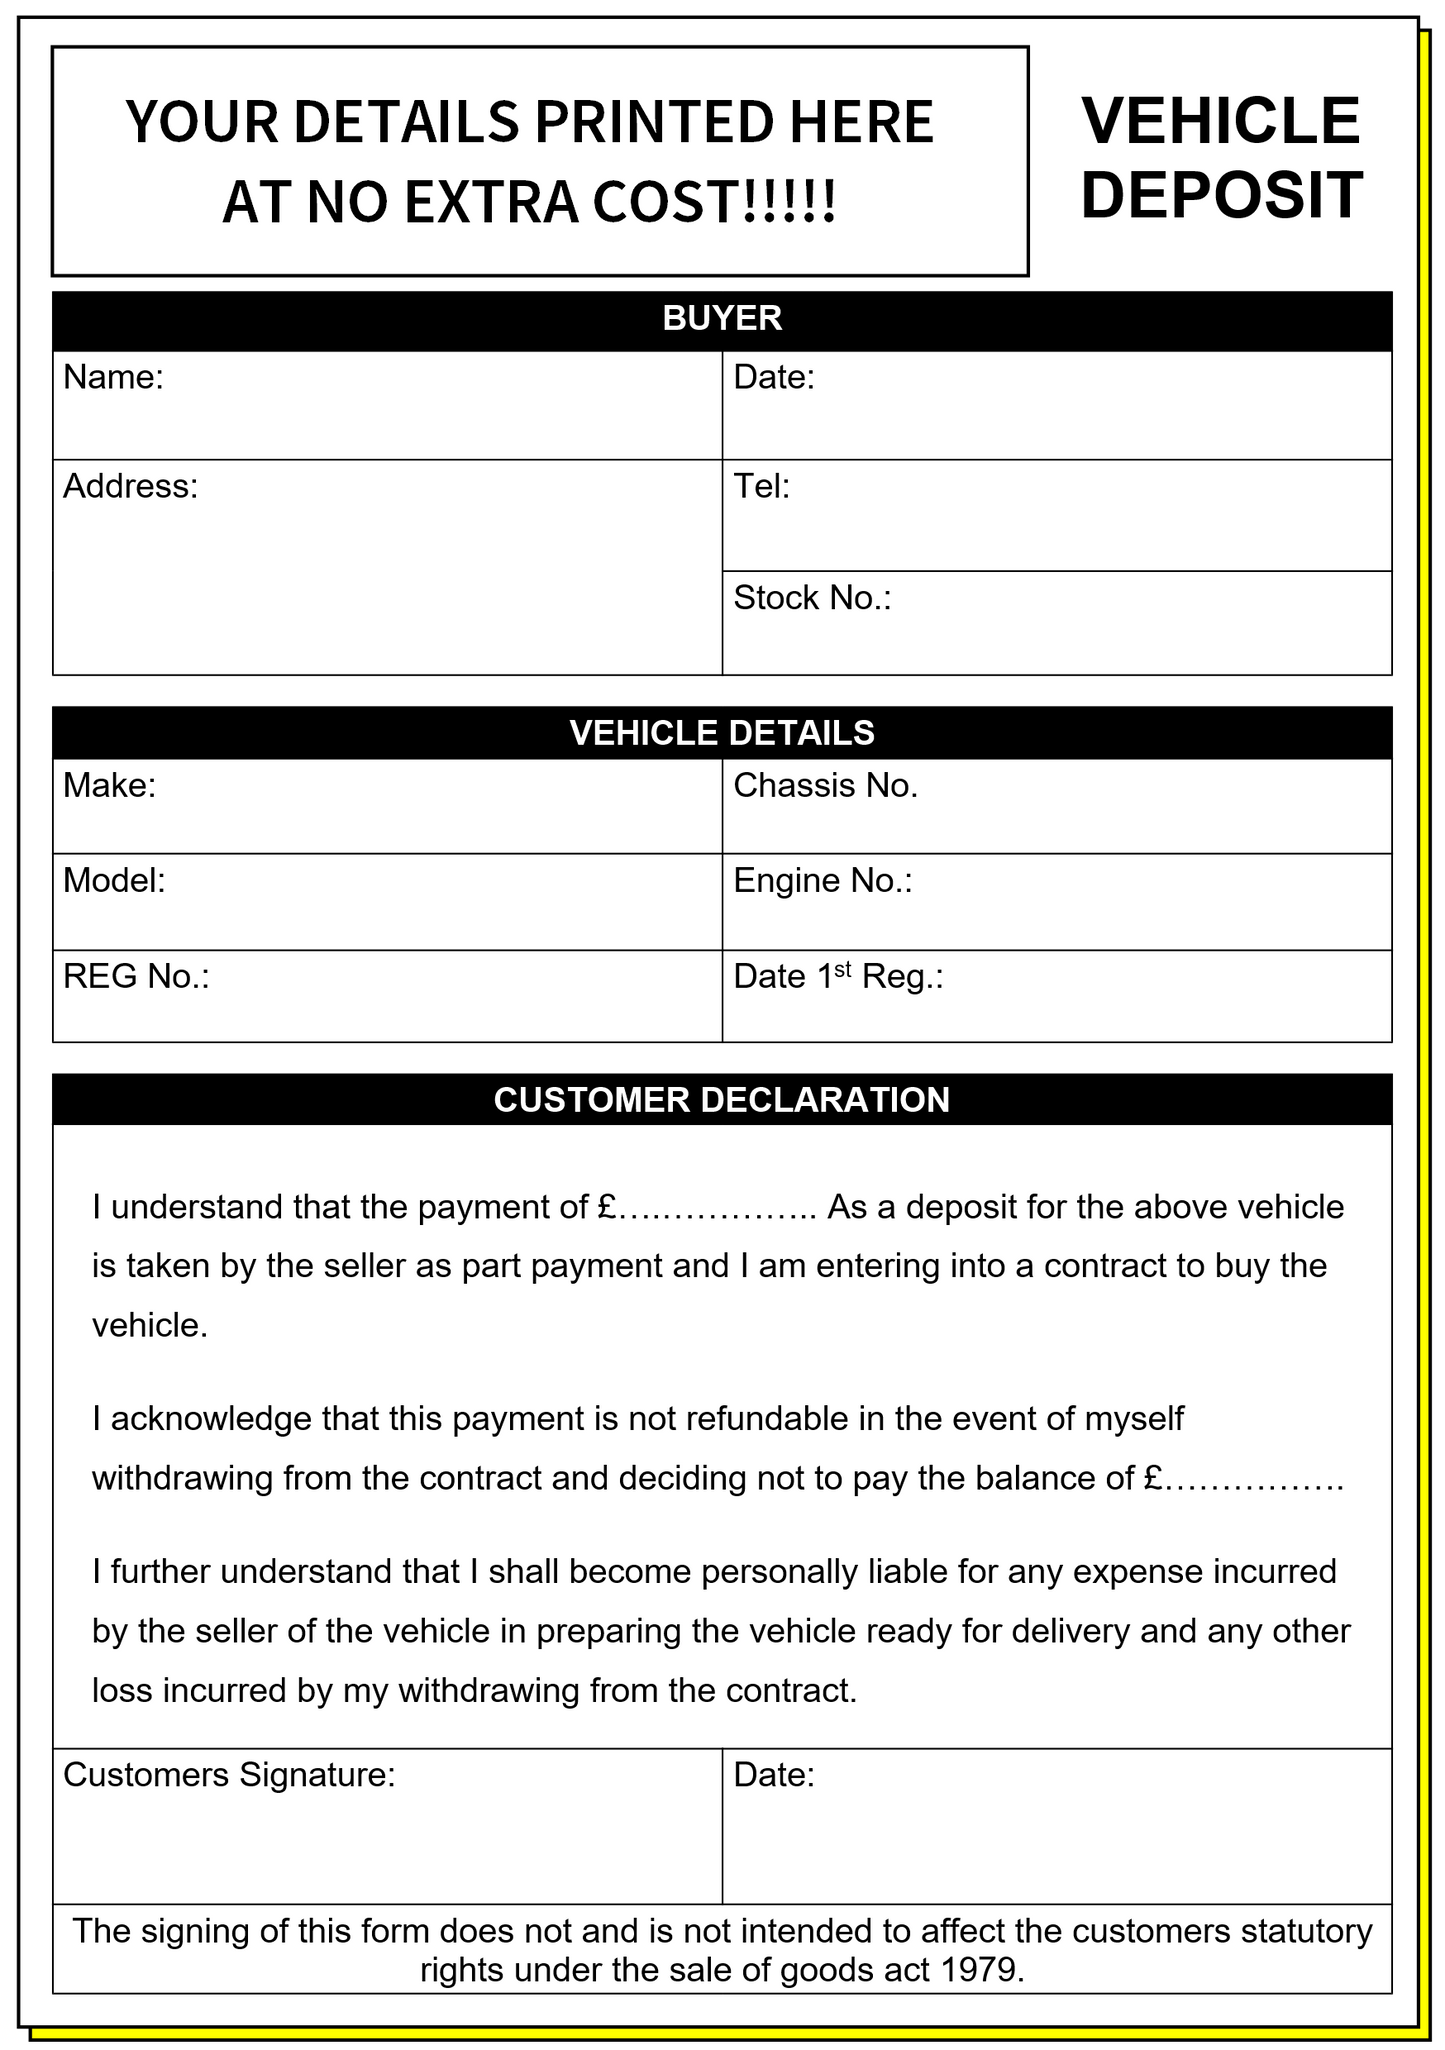 Forms for the Motor Trade